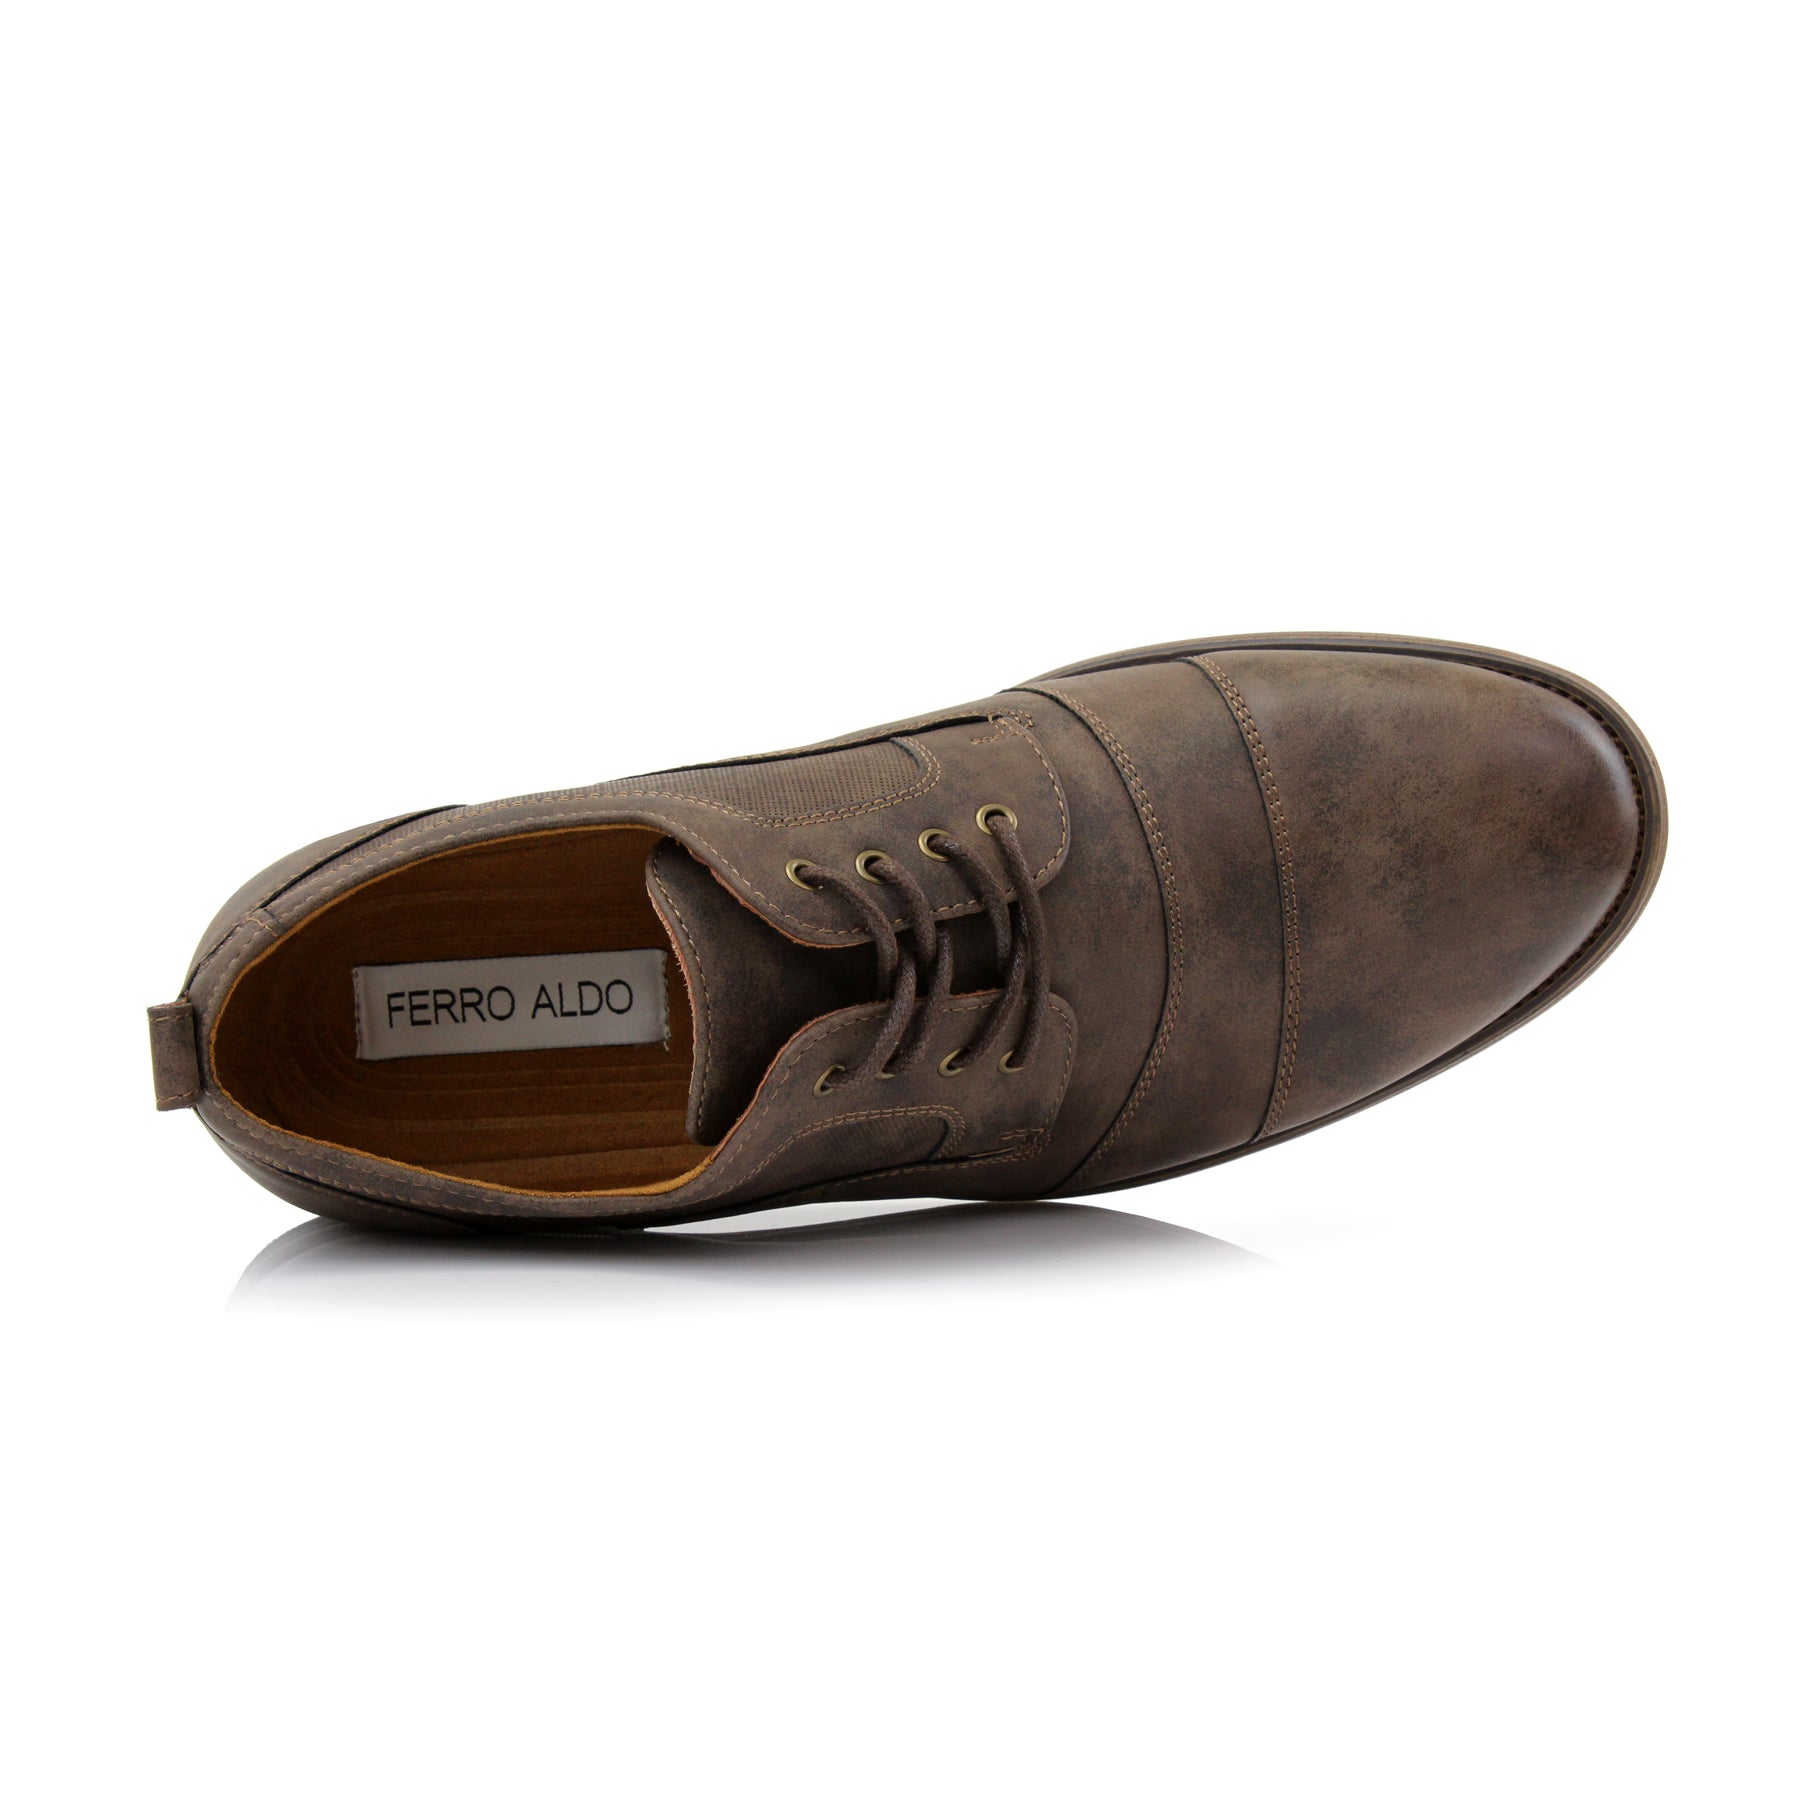 In Review: H&M Suede Derby Shoes